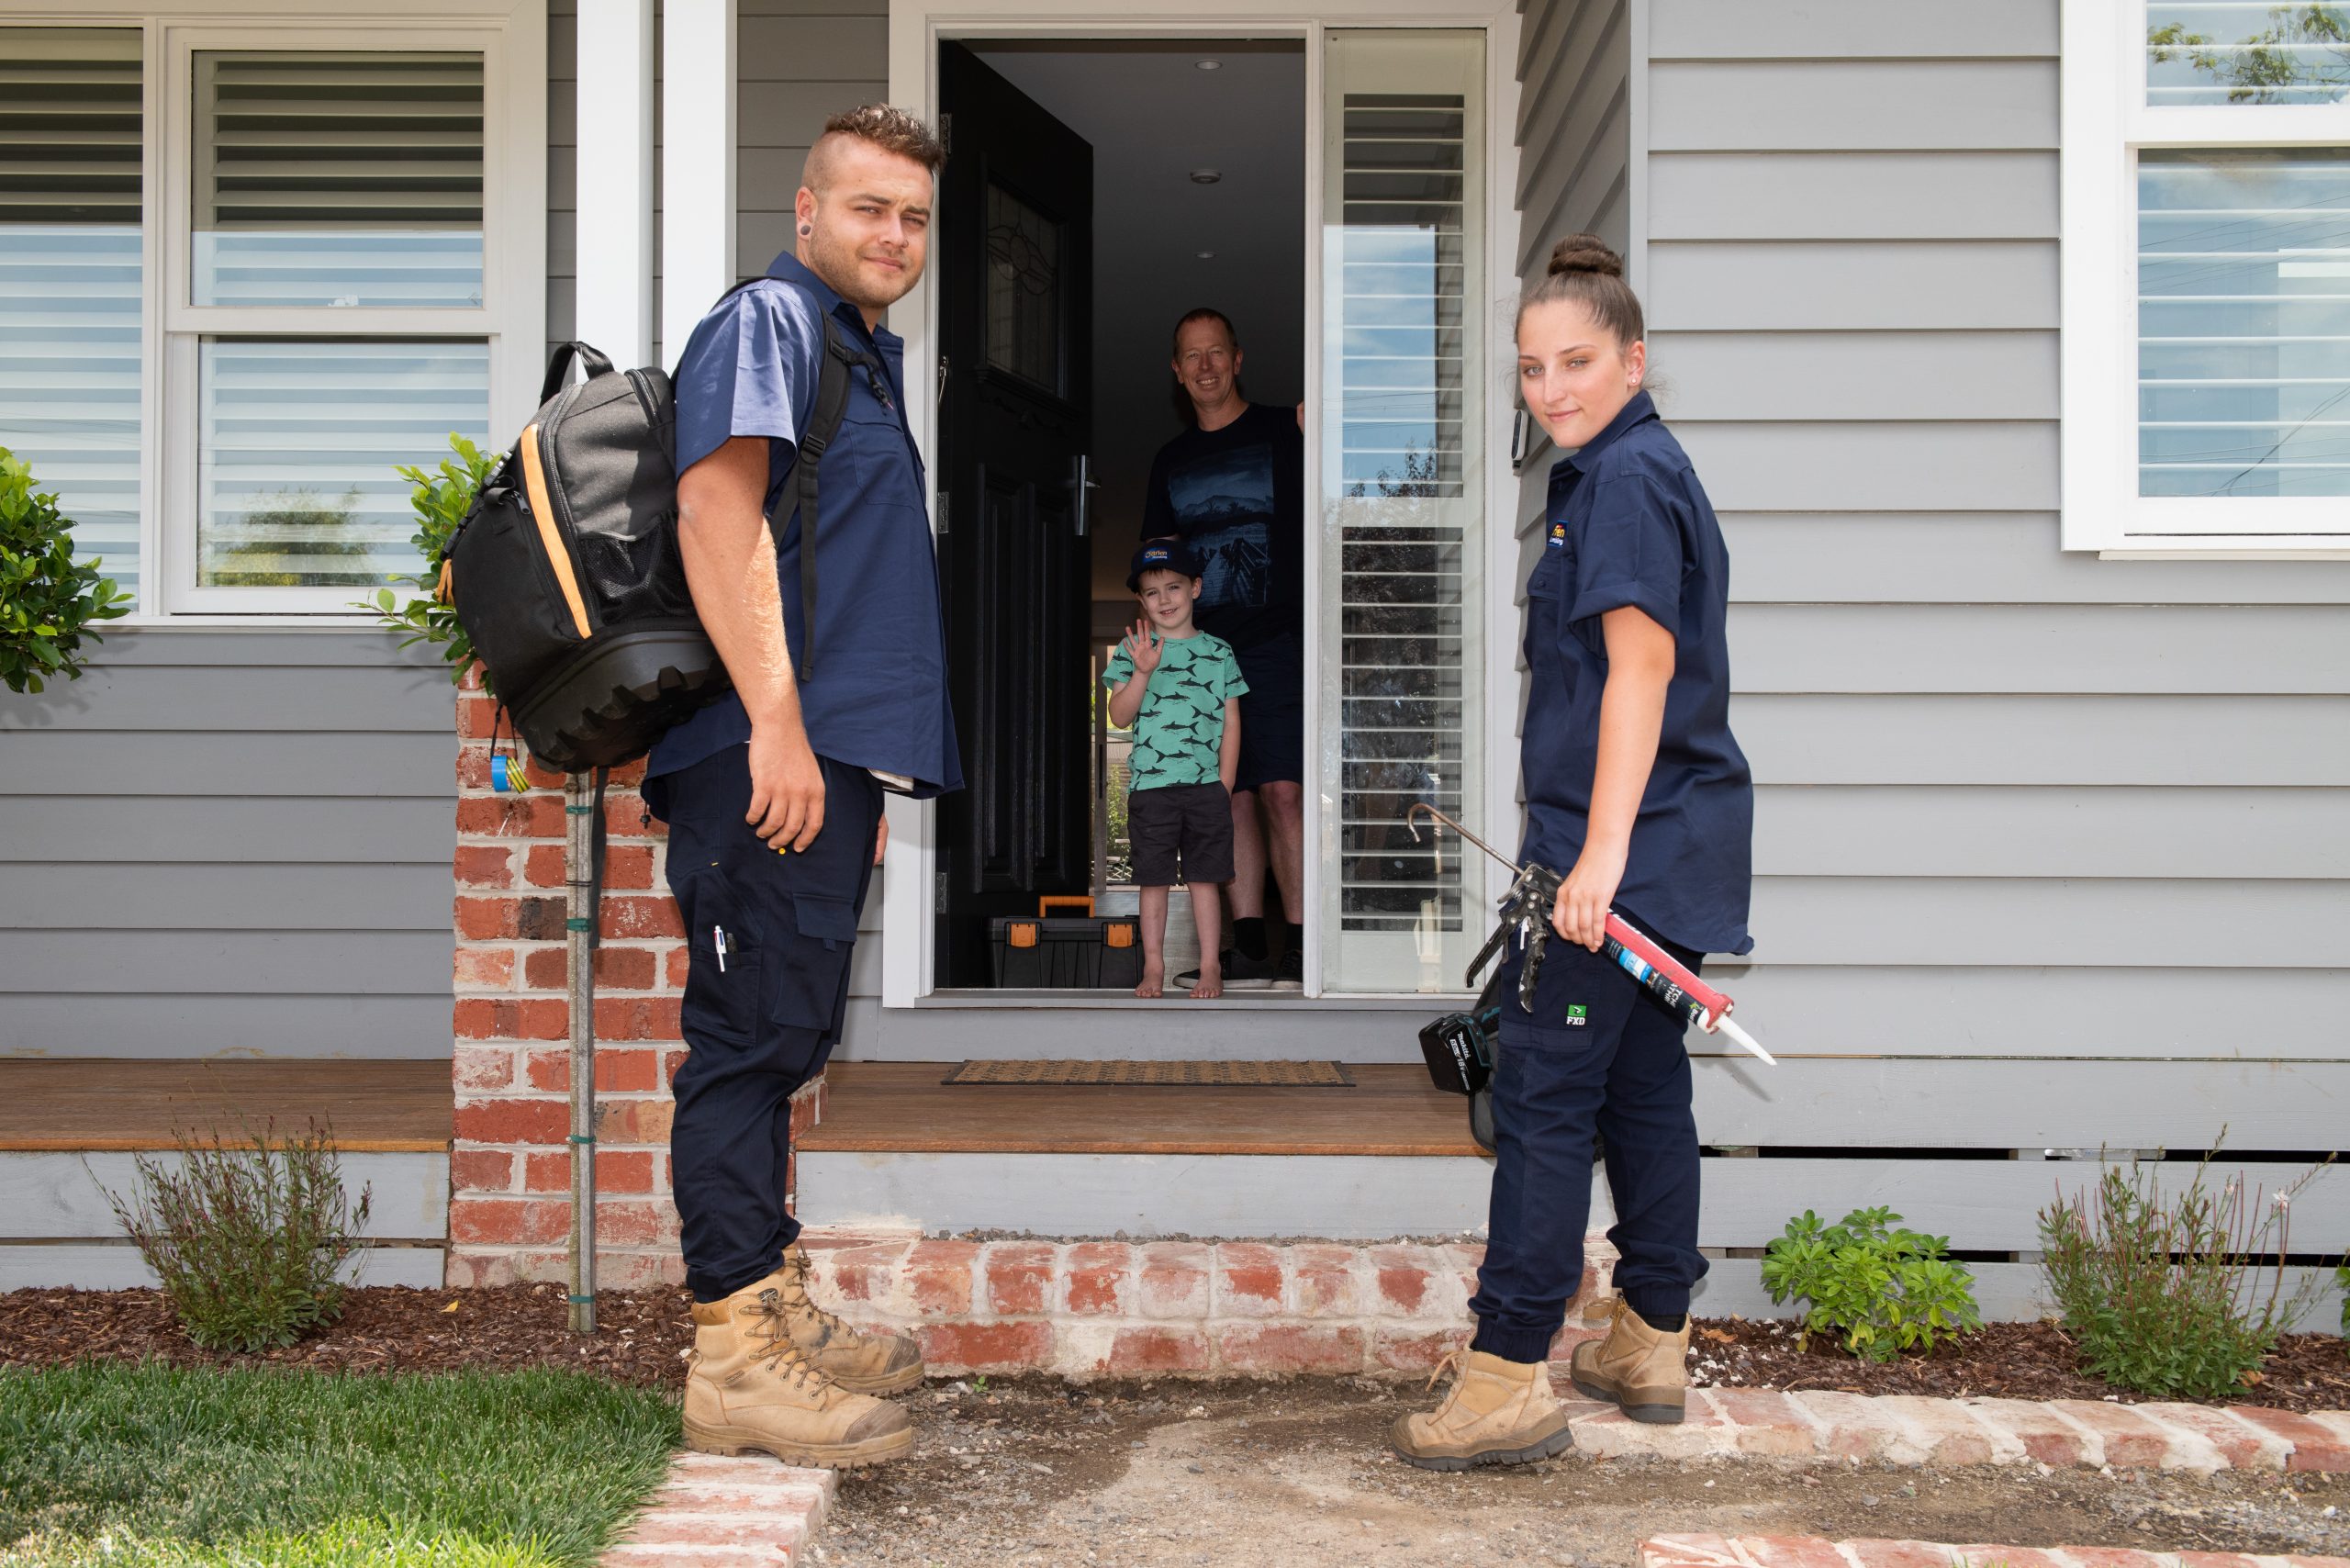 O'Brien plumbers greeted by customer and child in the front door